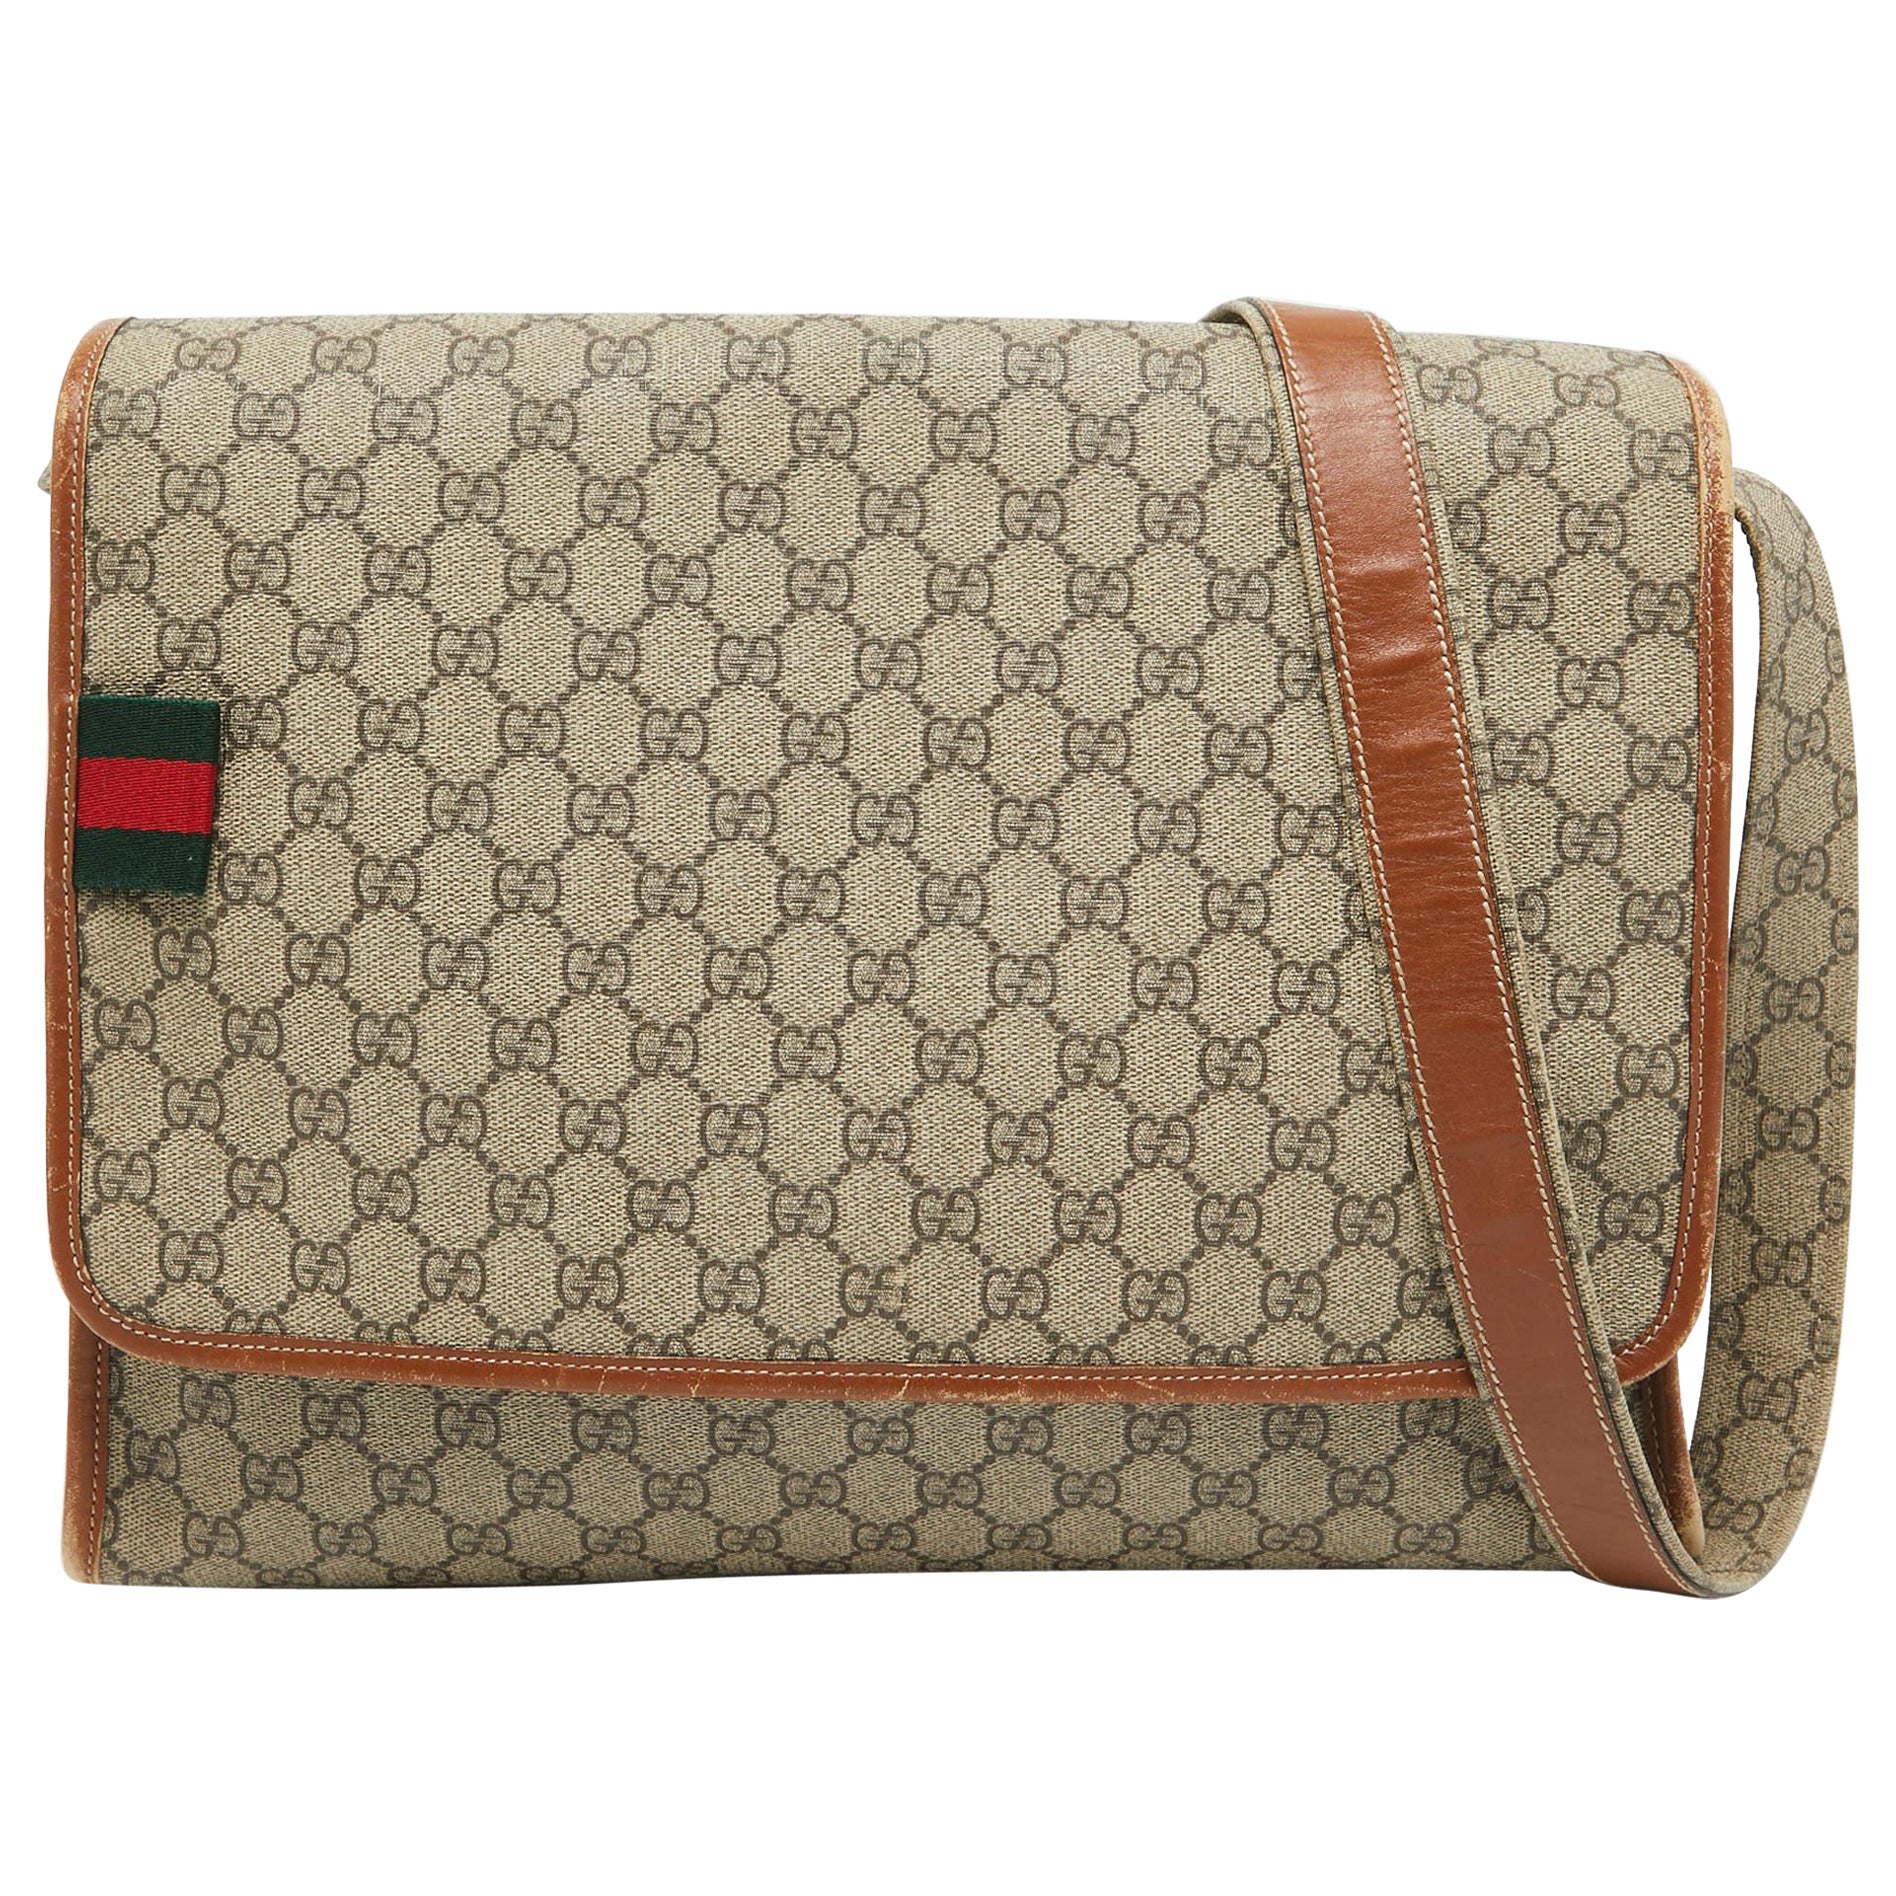 Gucci Beige/Brown GG Supreme Canvas And Leather Messenger Bag For Sale